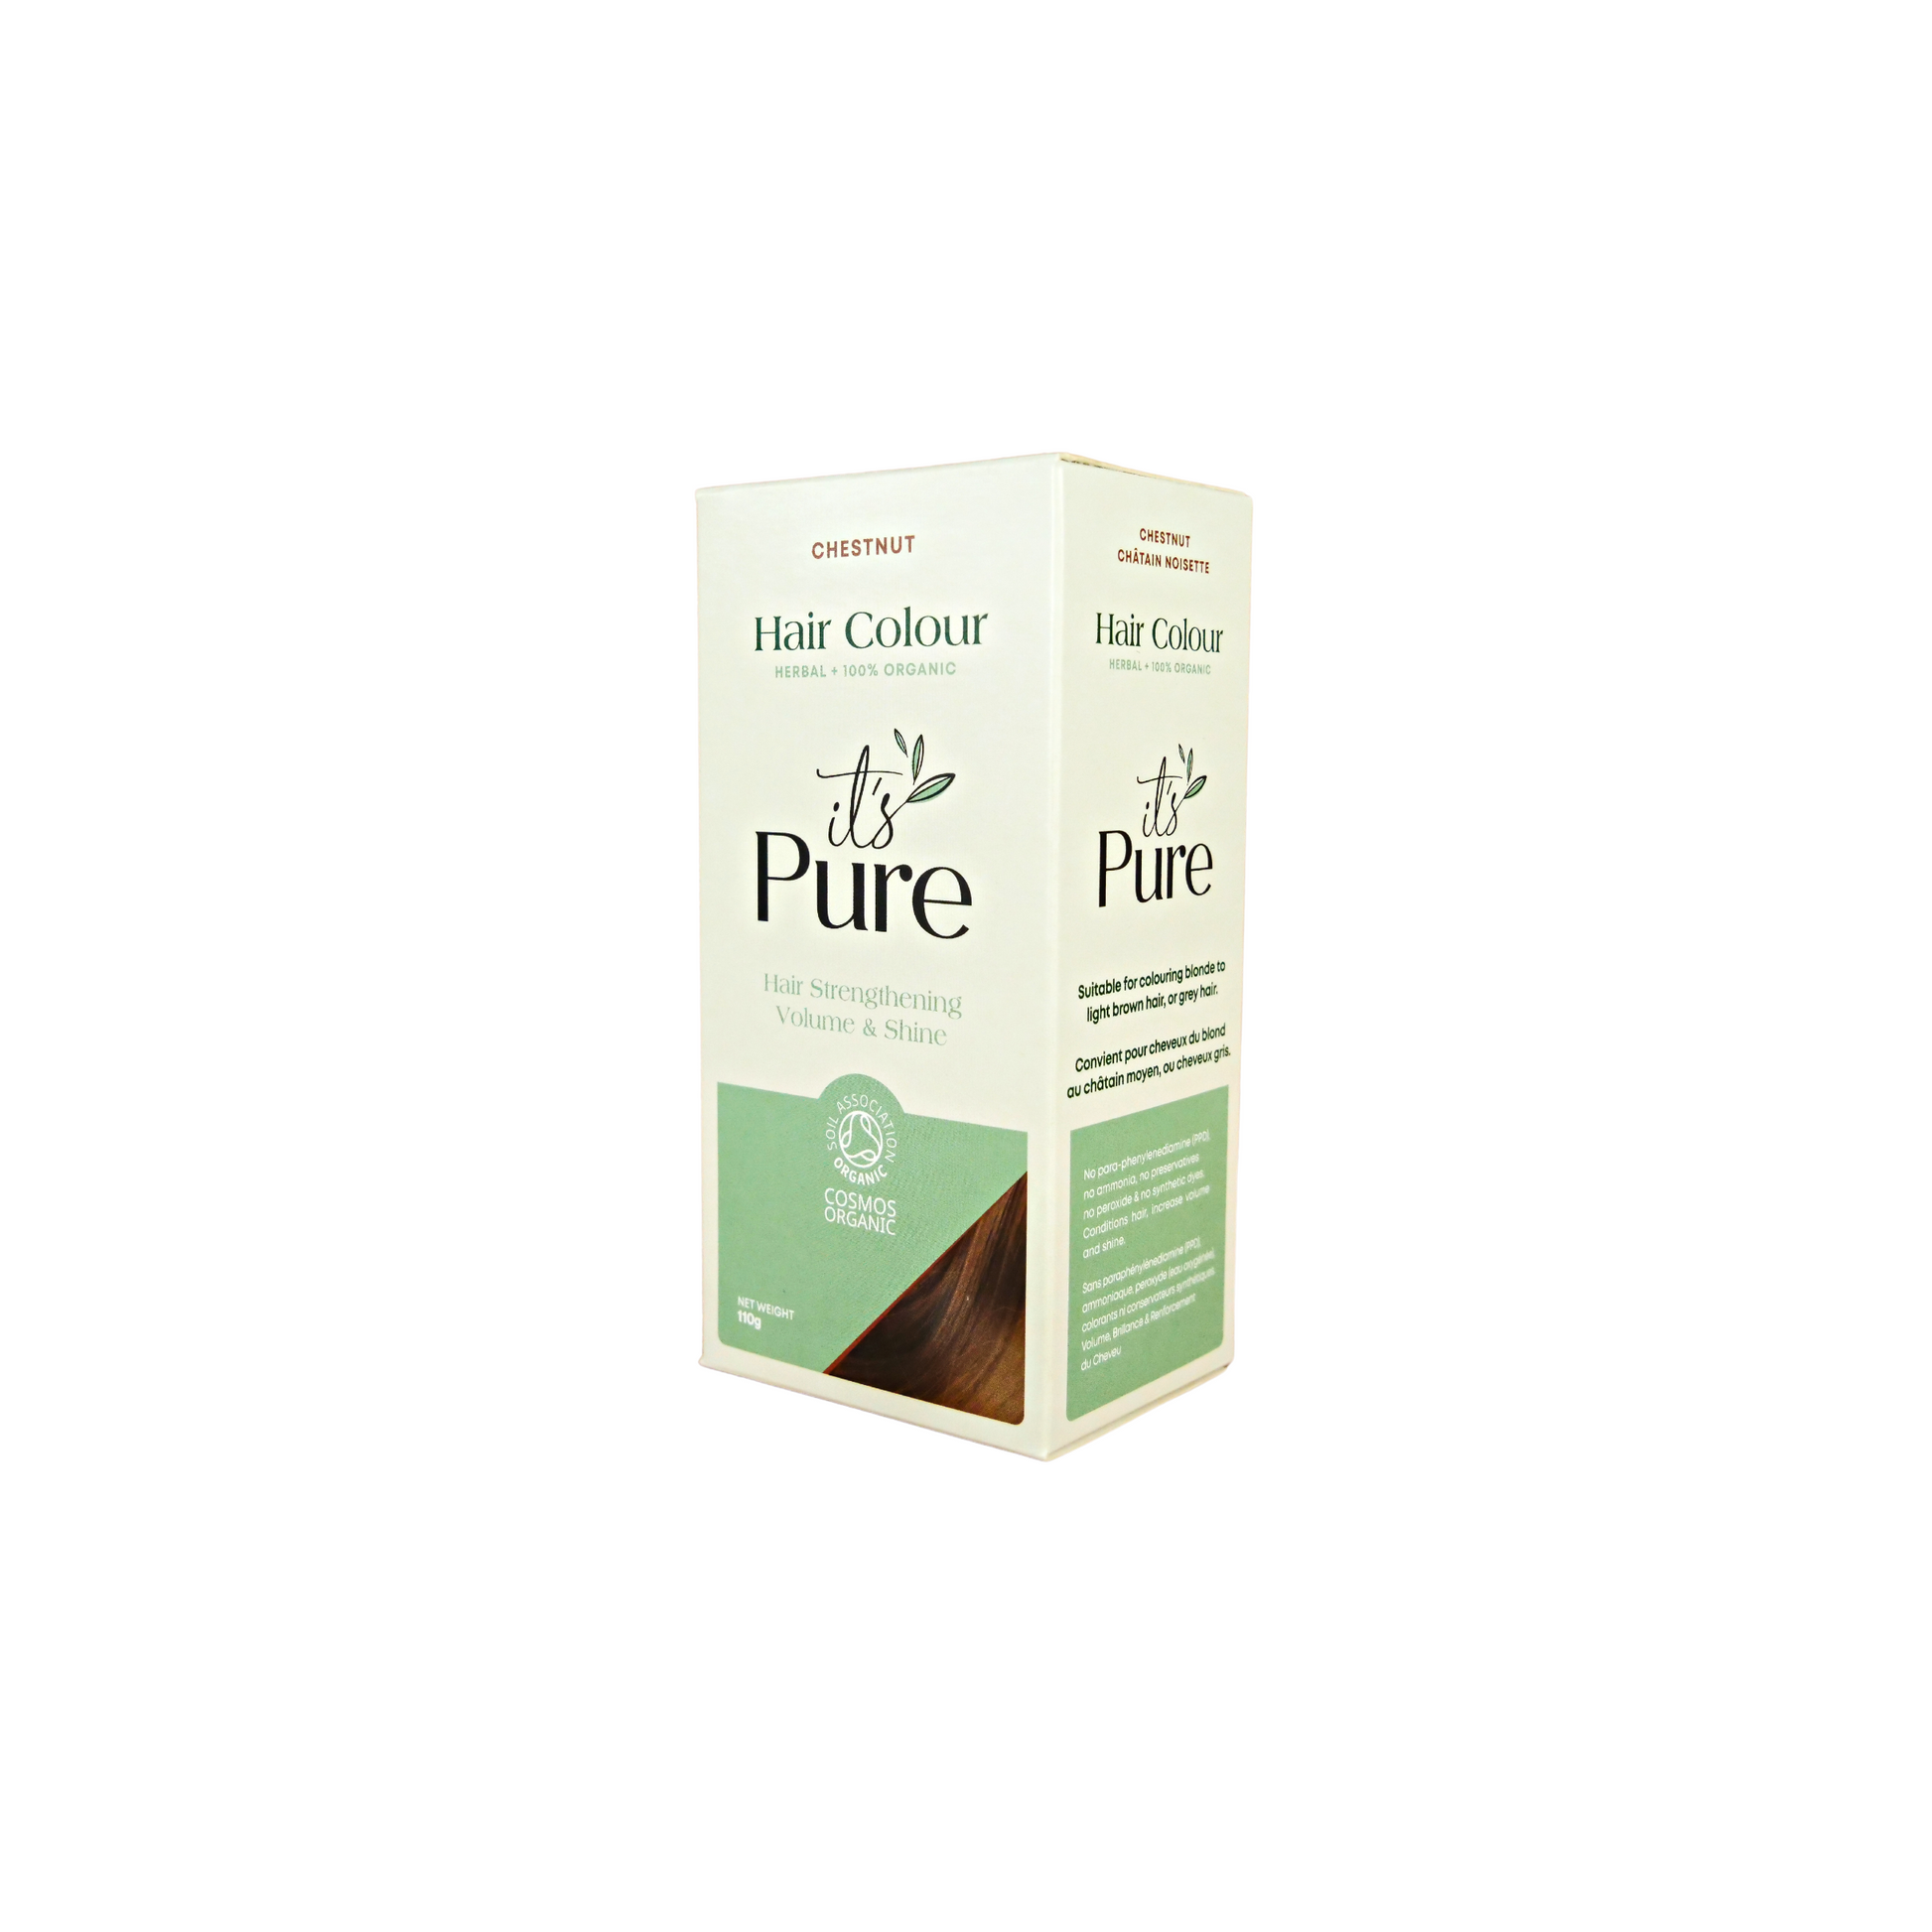 it's pure chestnut semi permanent natural hair dye in light green and green box on white background